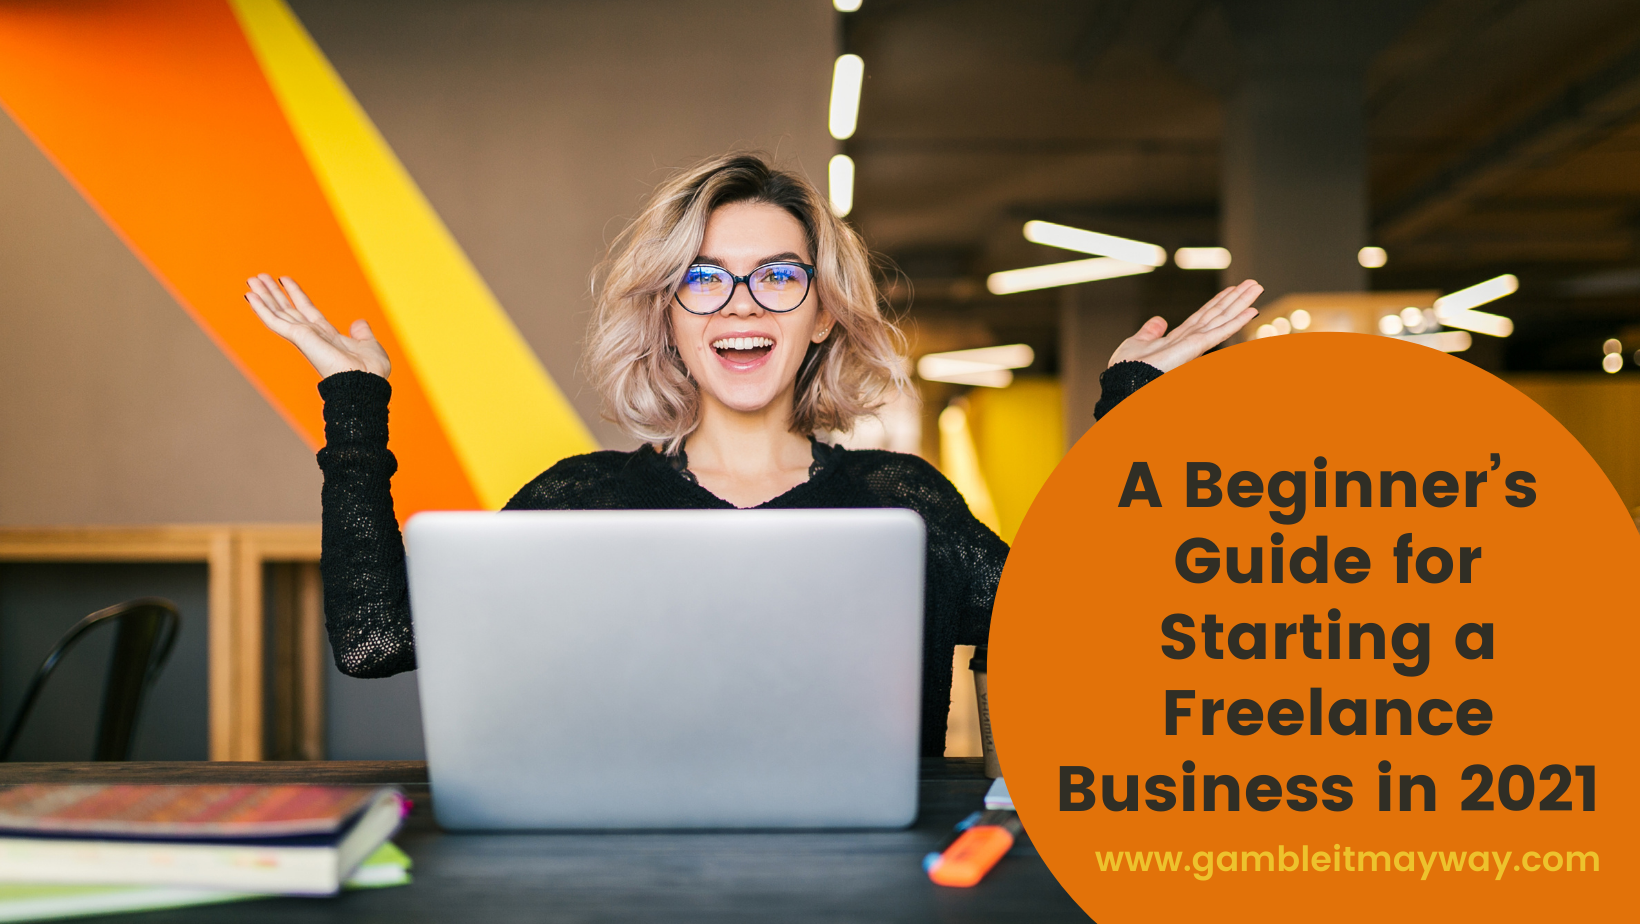 A Beginner’s Guide for Starting a Freelance Business in 2021